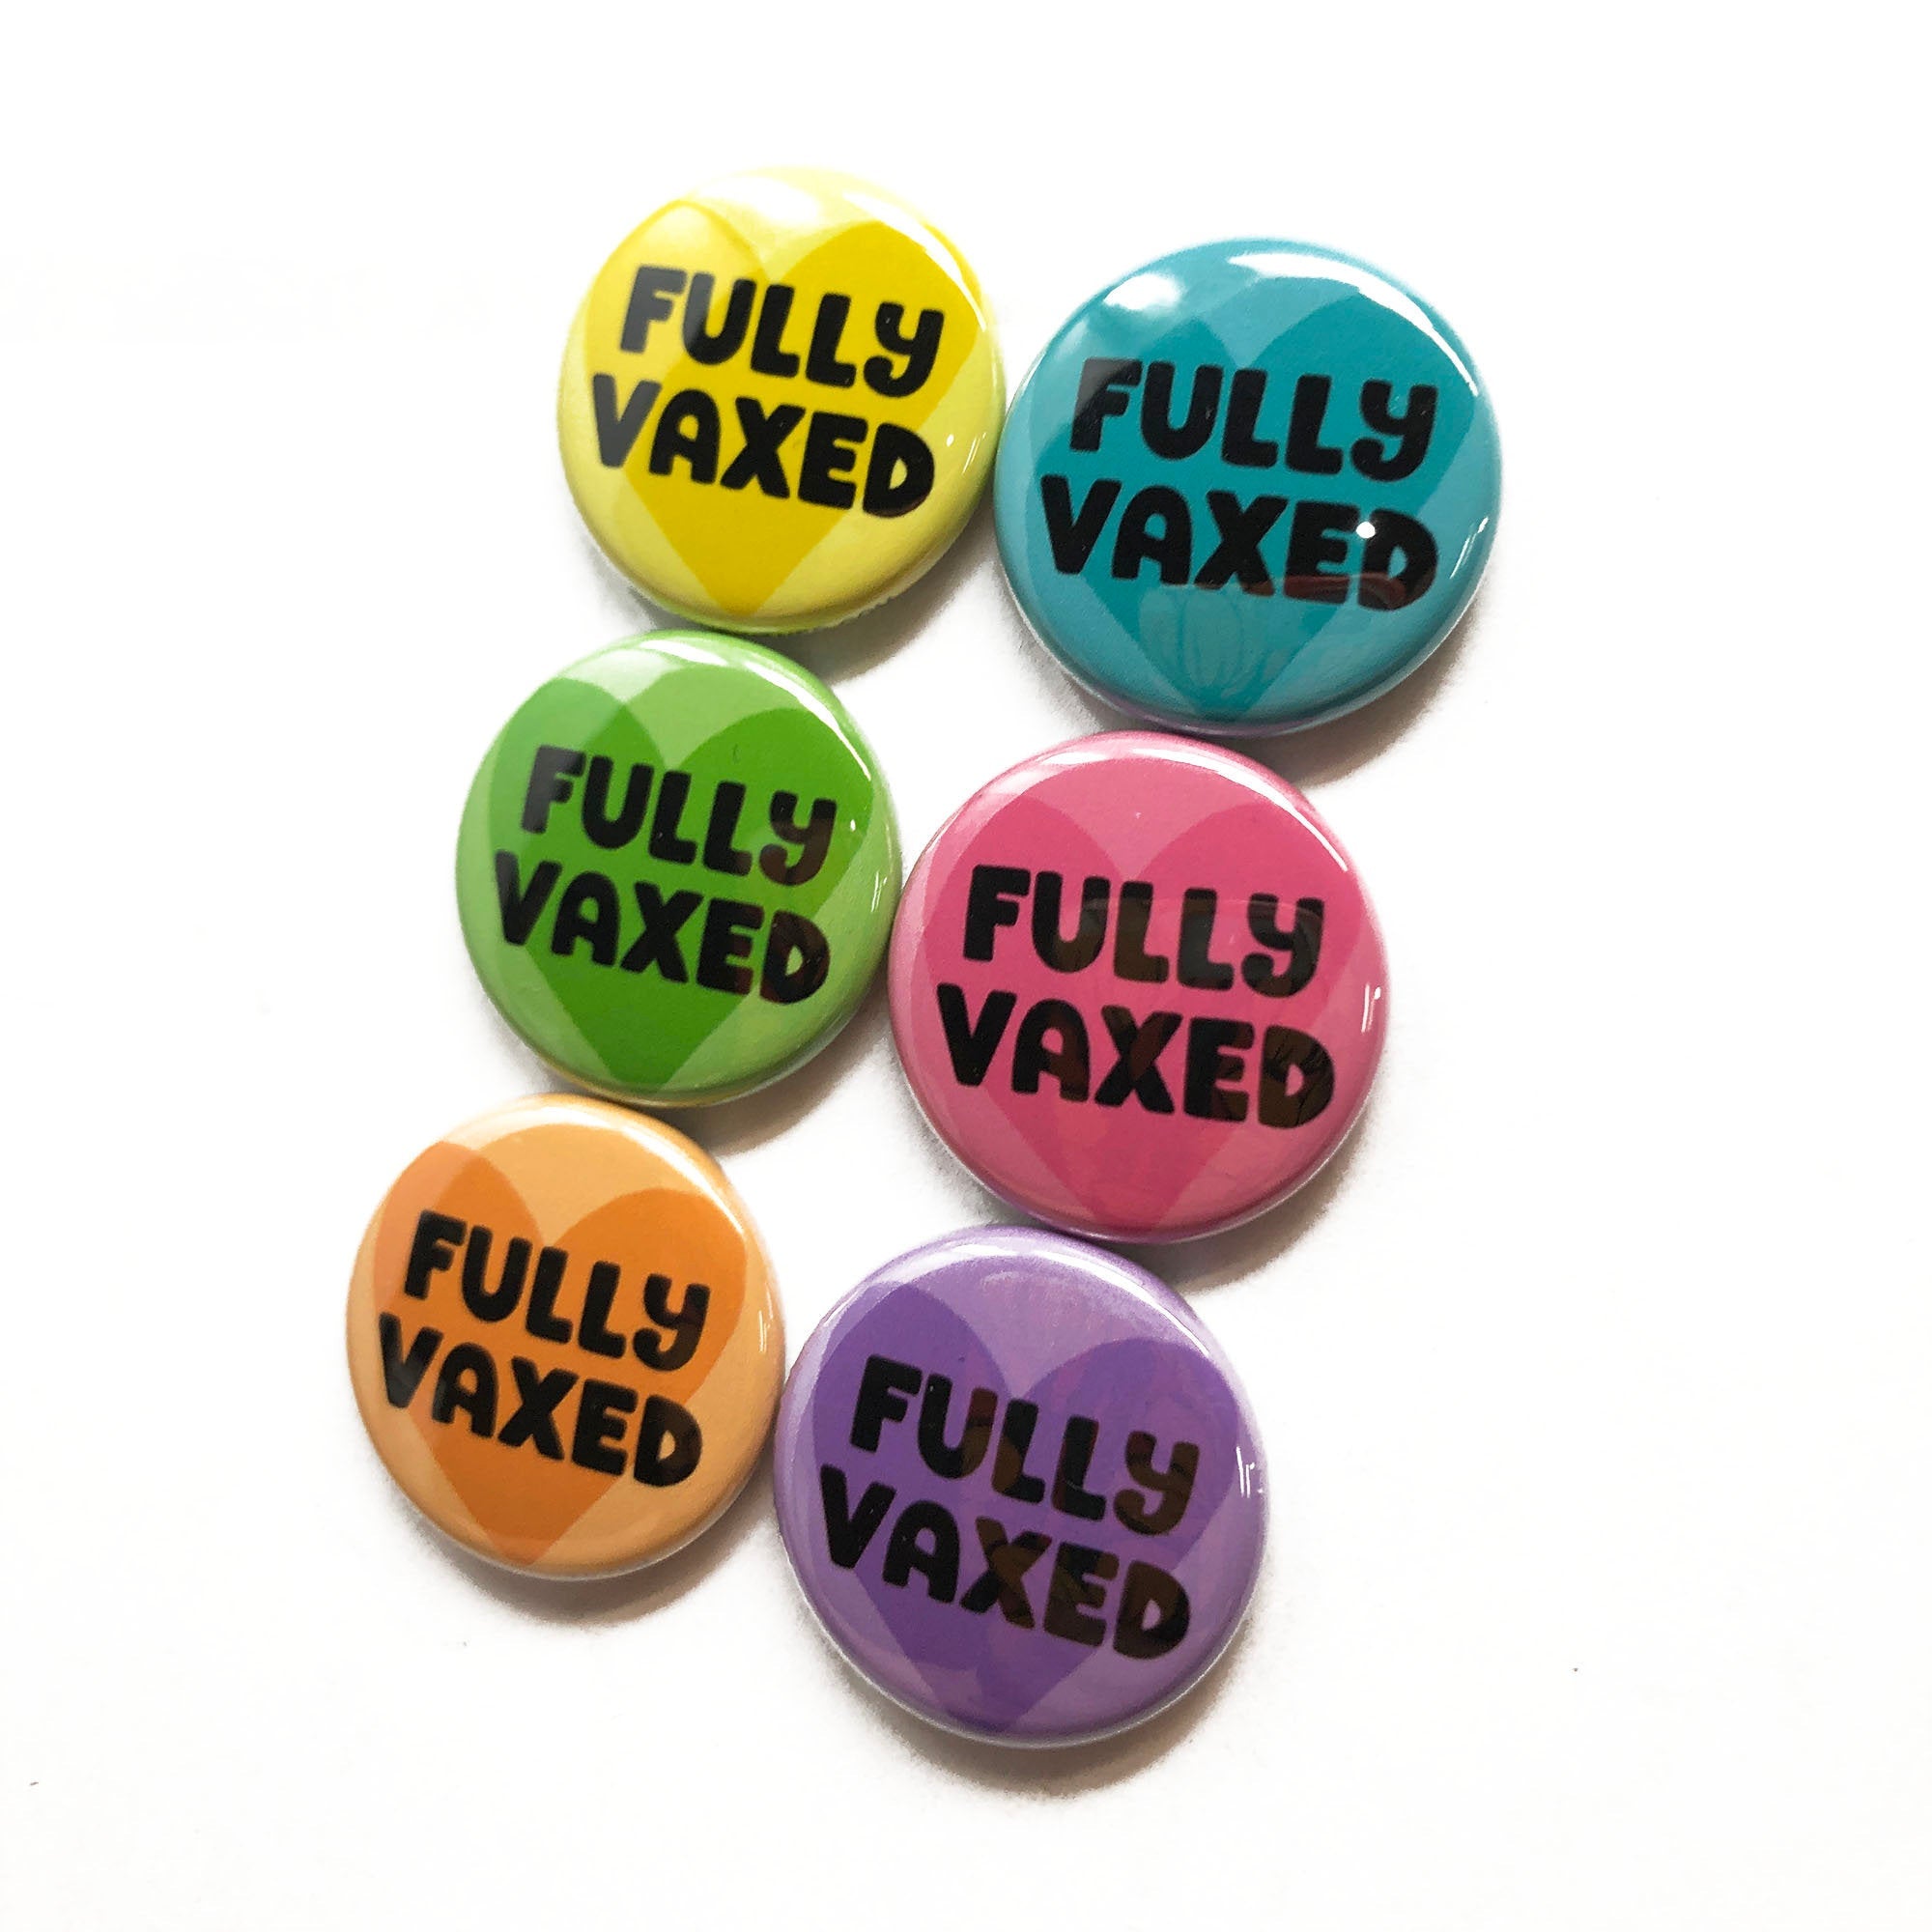 CovidVaccine Pin - Fully Vaccinated Pinback Button or Magnet - Covid Vaccine Fully Vaxed - Vaccination - set of 6 - 1 inch pin or magnet